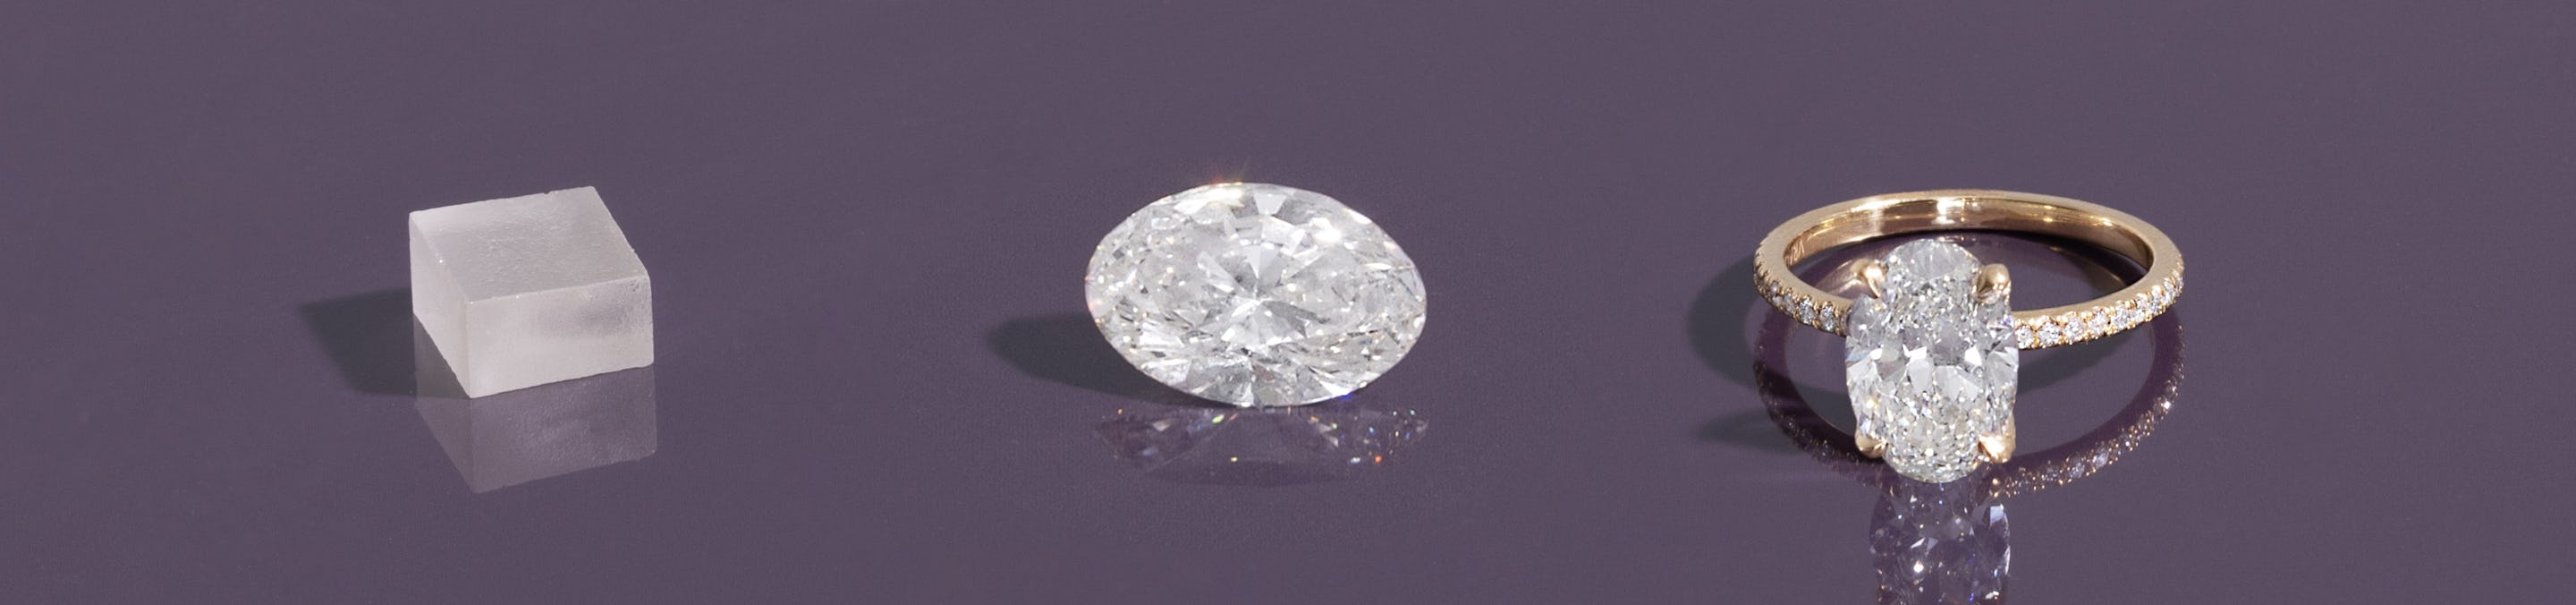 A rough VRAI created diamond, Oval cut diamond, and Oval cut engagement ring